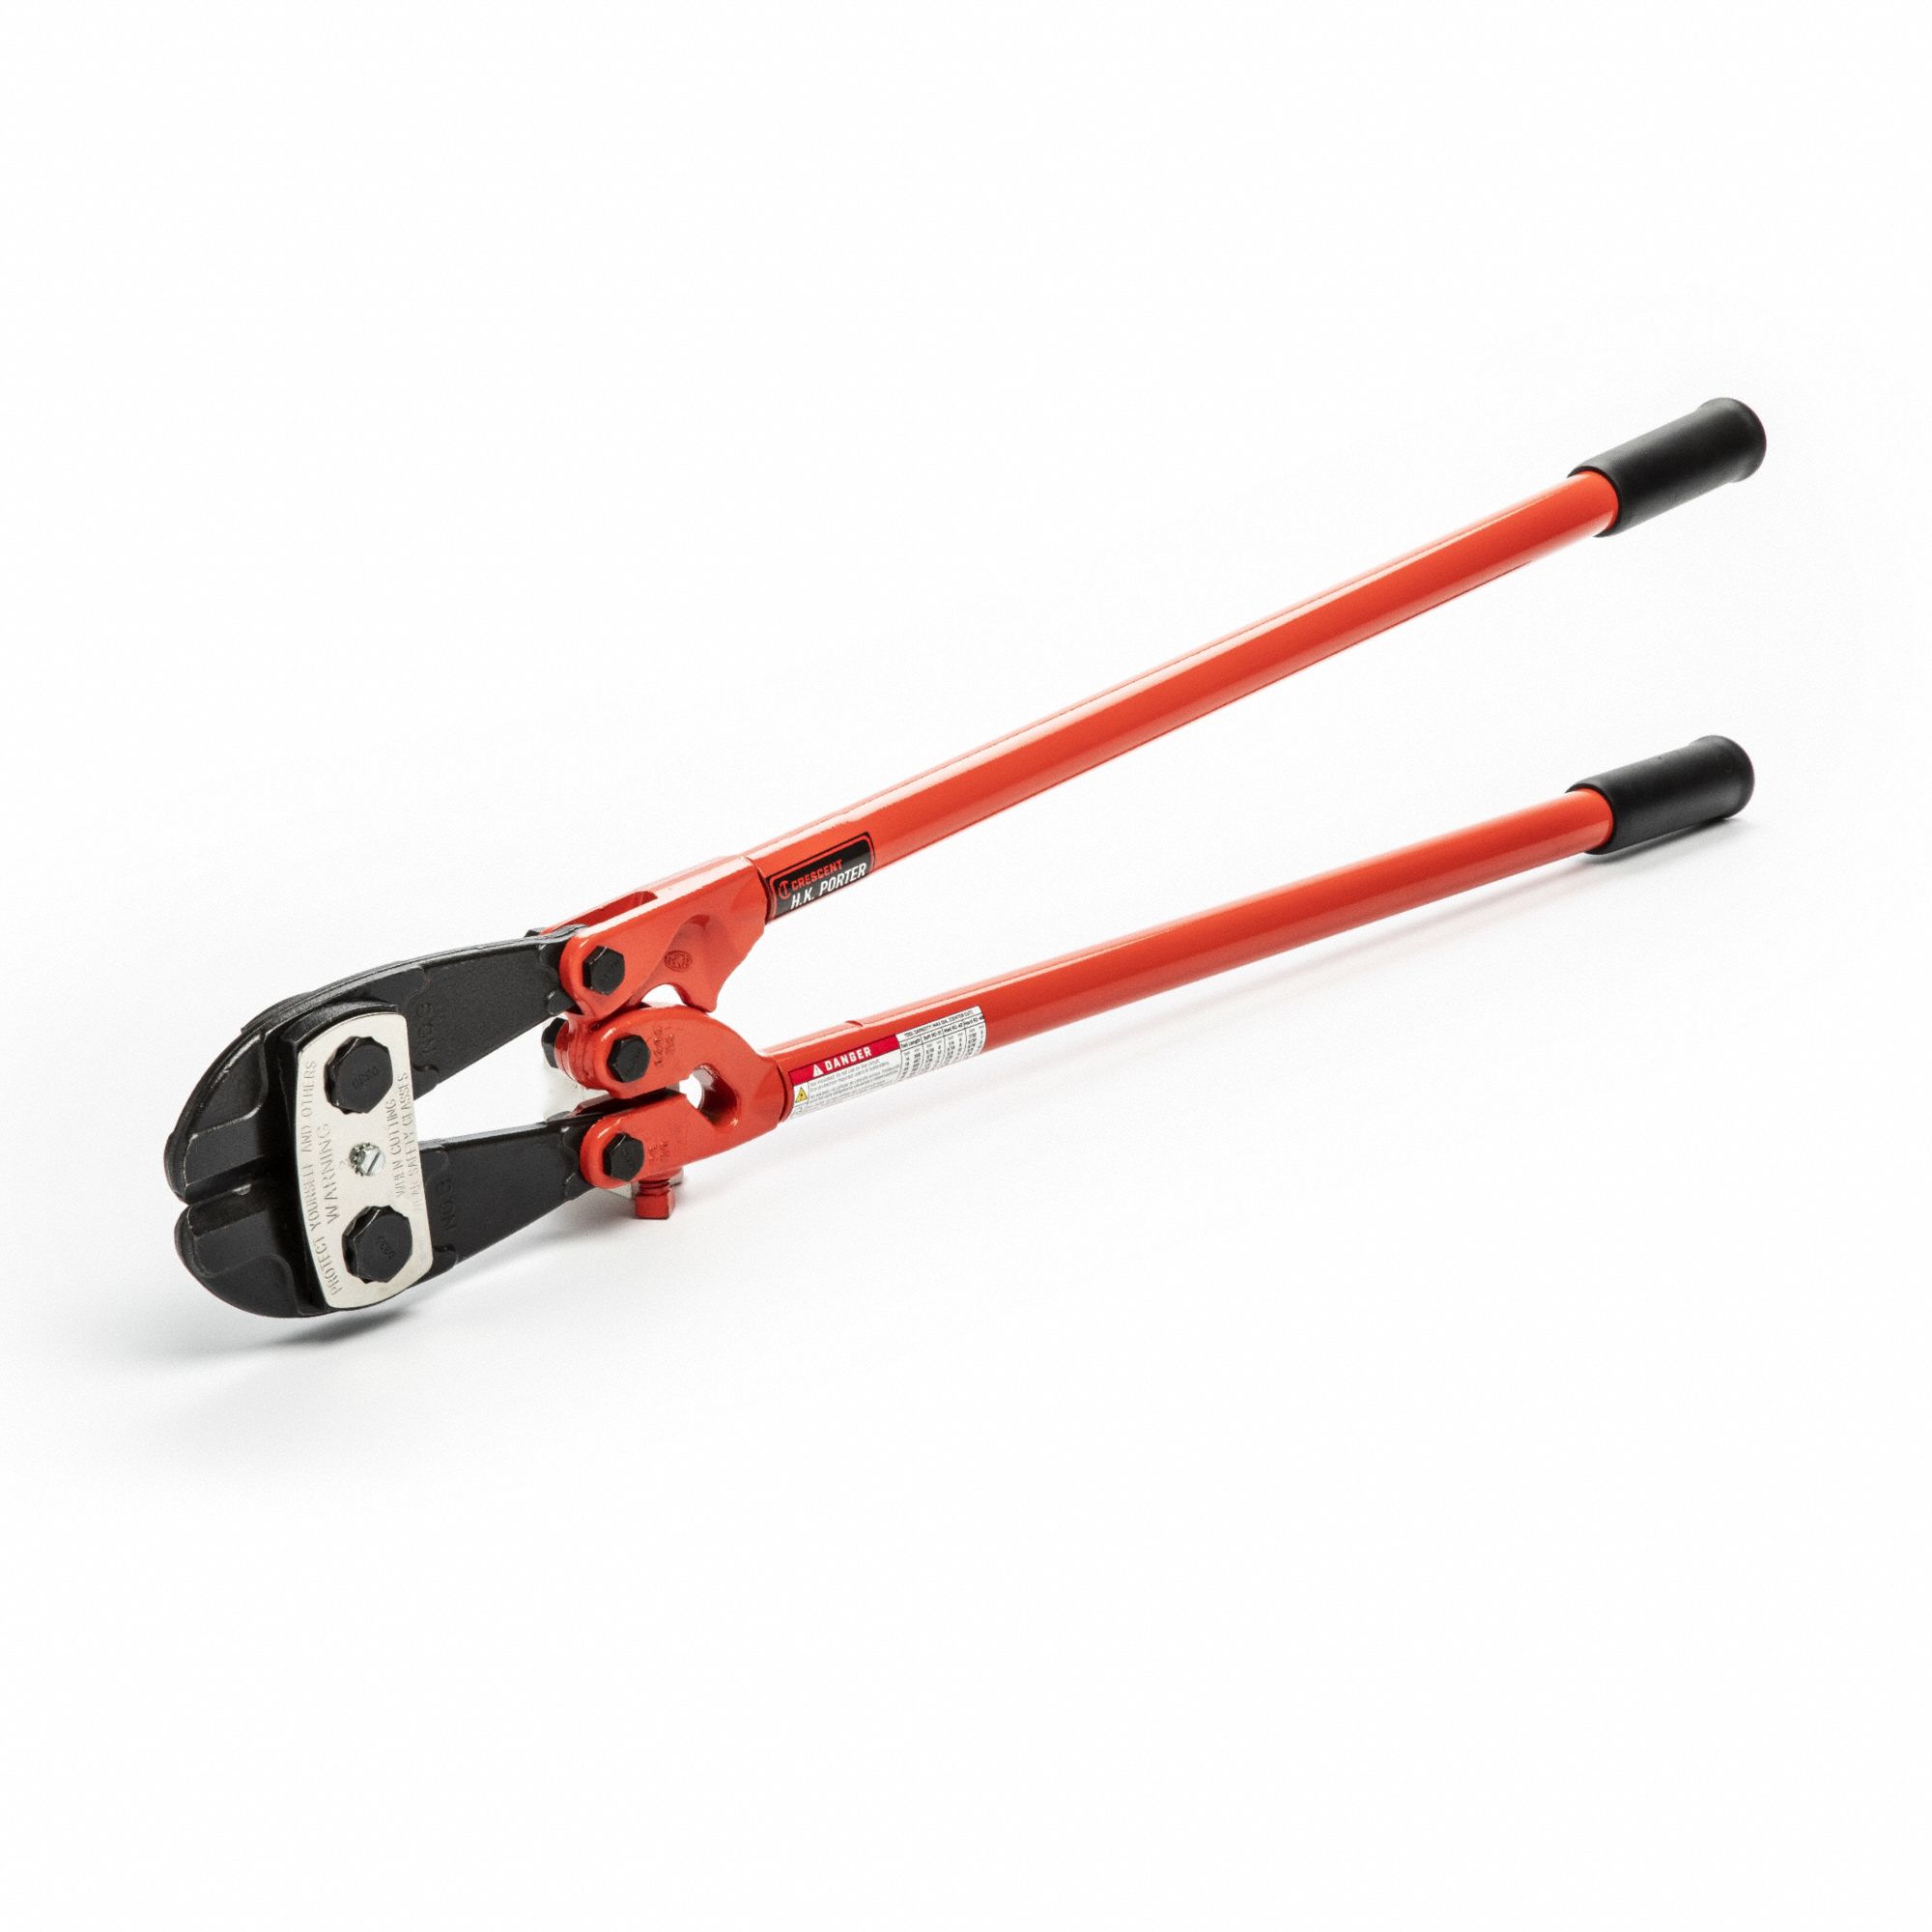 911003-9 H.K. Porter Steel Bolt Cutter,42 Overall Length,1/2 Hard  Materials up to Brinnell 455/Rockwell C48